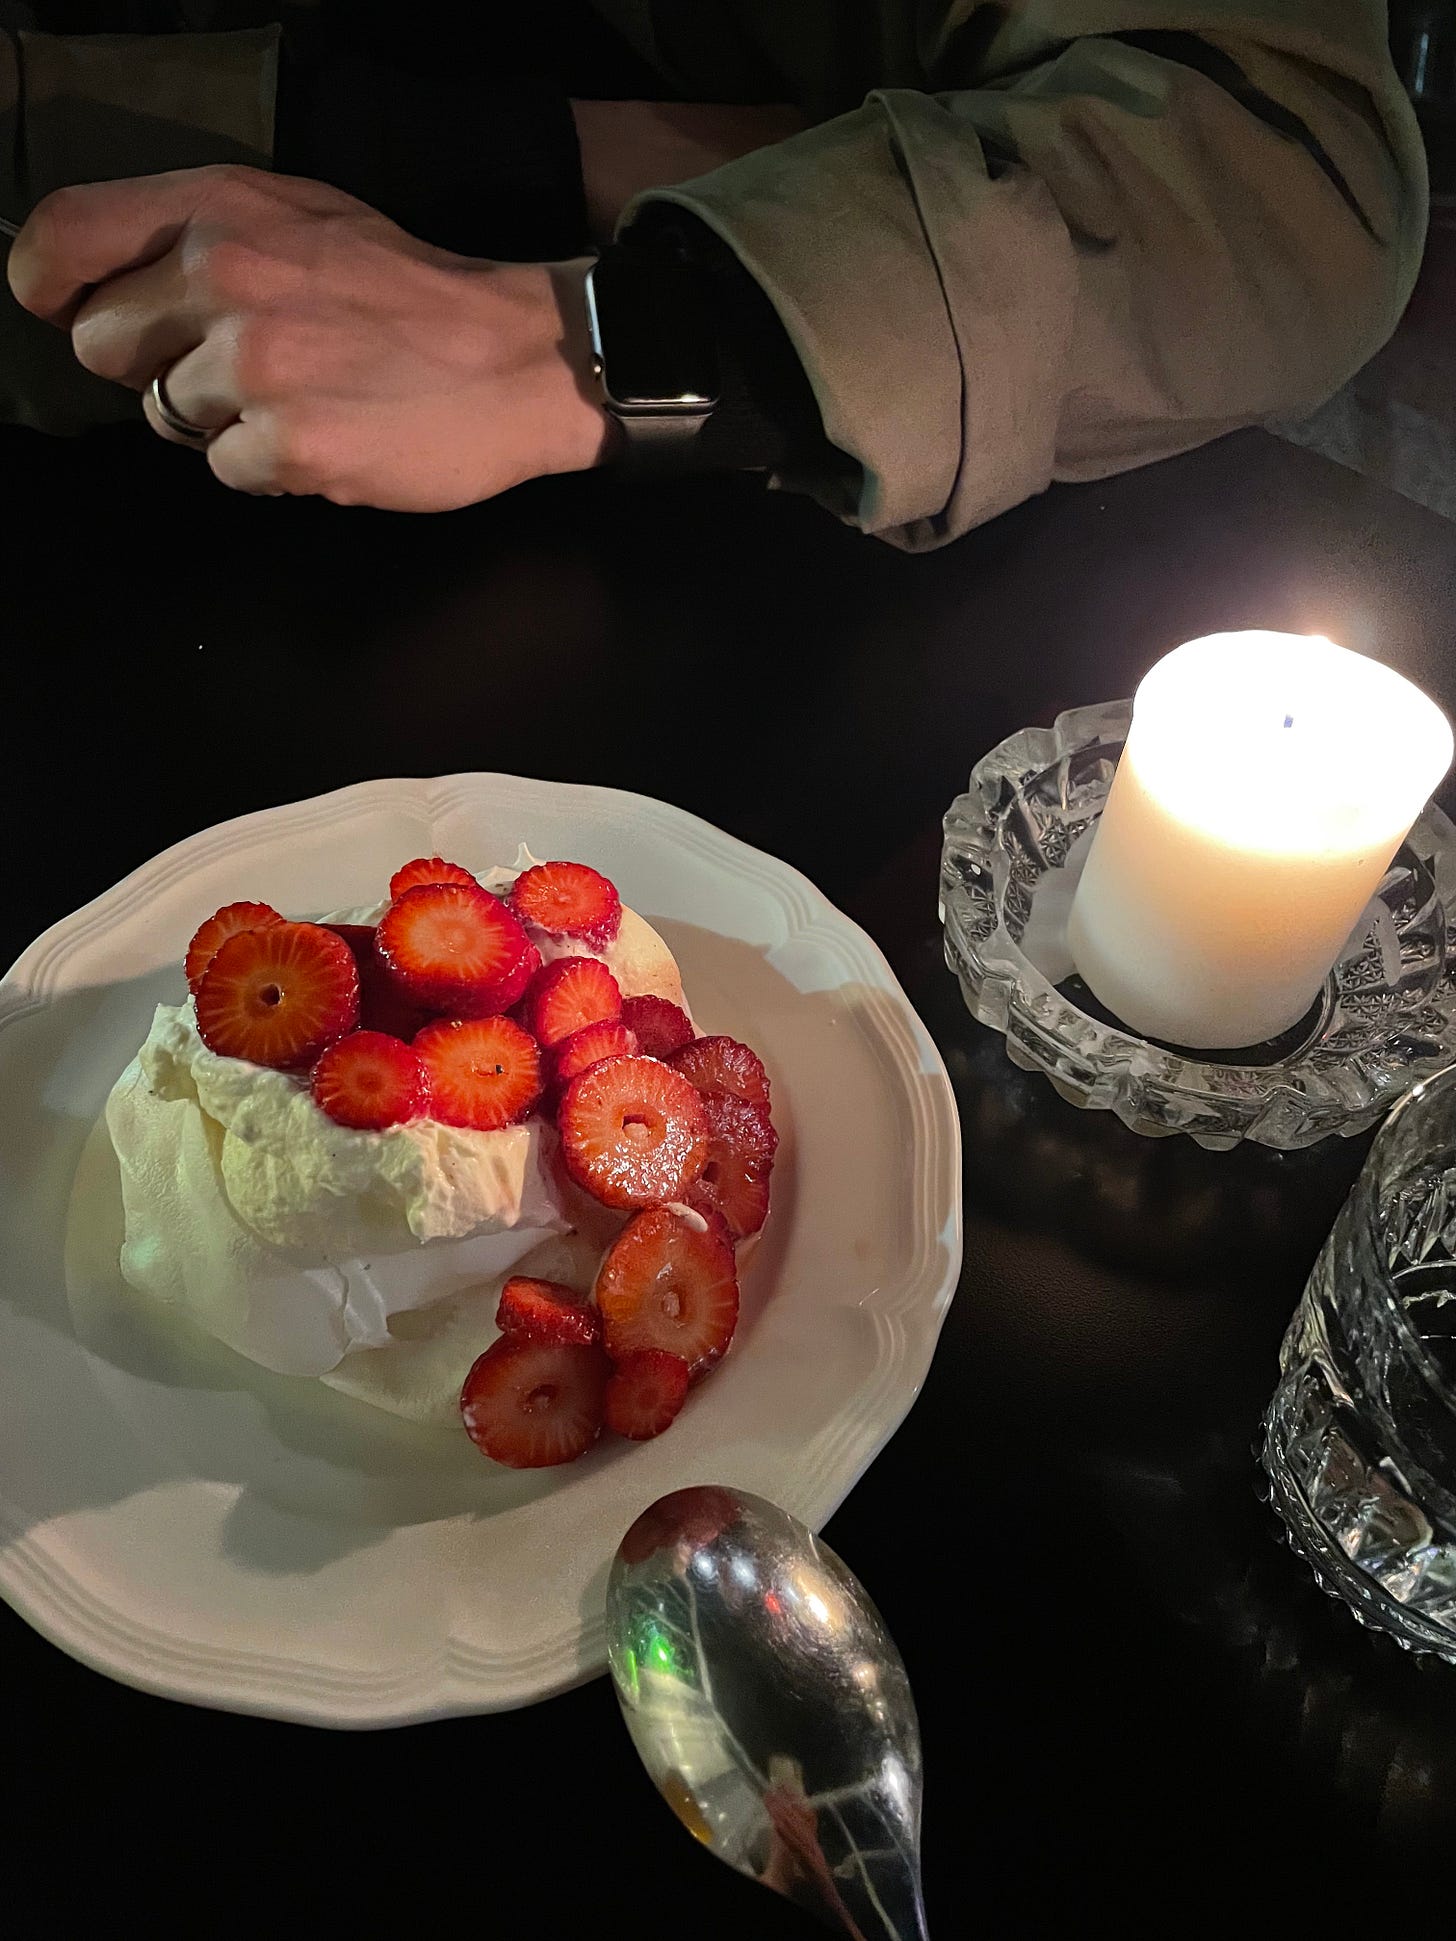 Small pavlova on a white plate with fresh cream and sliced strawberries soaked in pet nat.